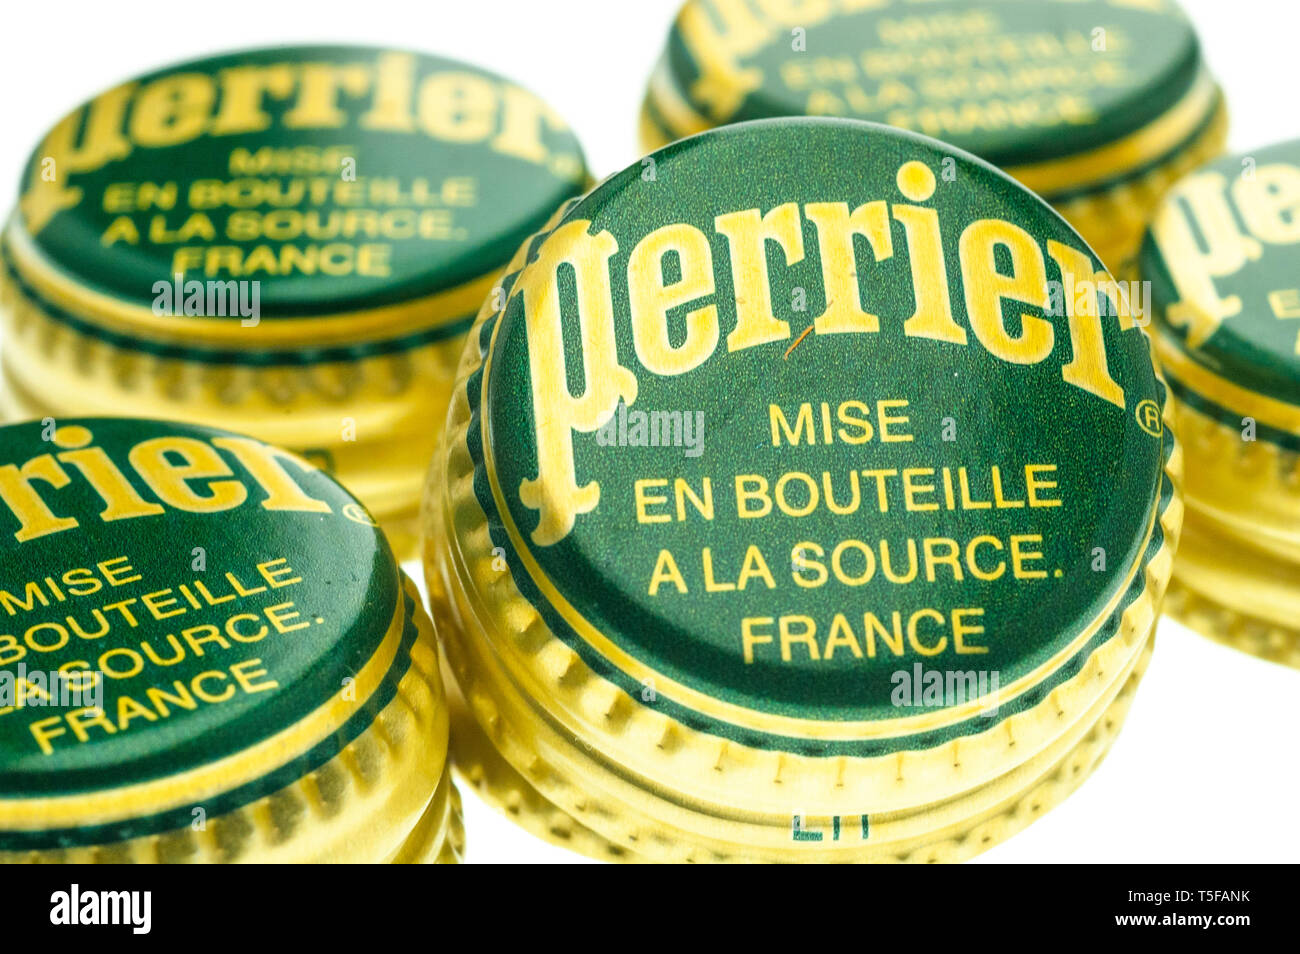 Perrier Bottle Tops, Perrier is a French brand of natural mineral water from its source in Vergeze. Stock Photo